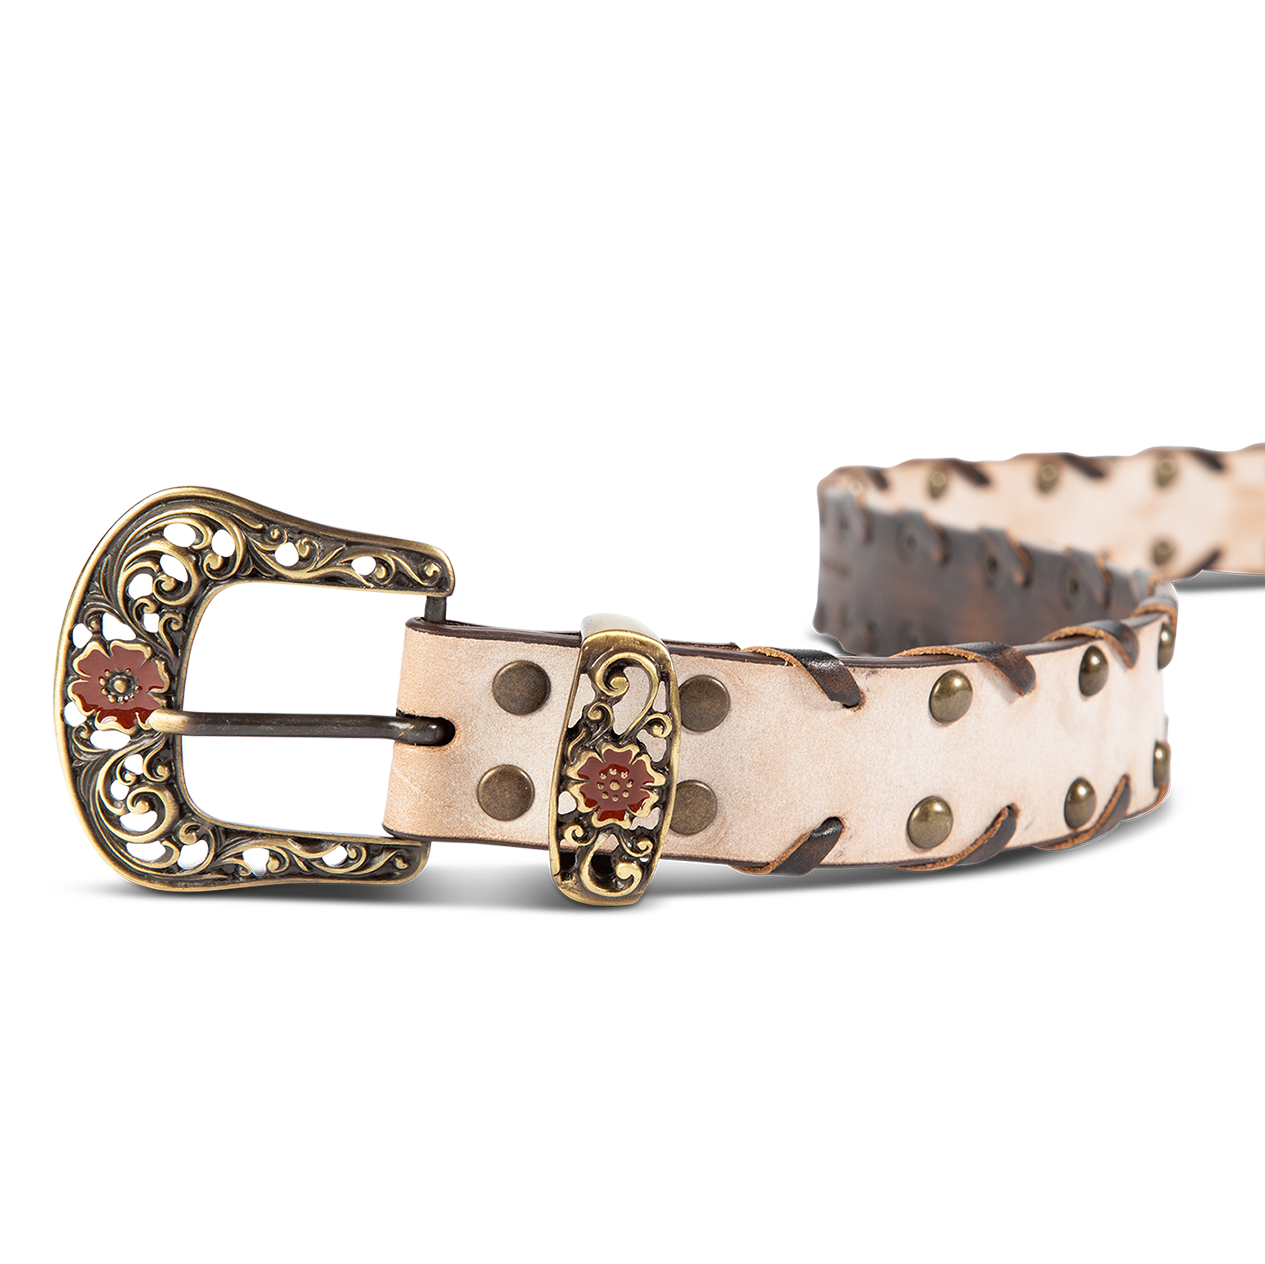 Whip taupe front view featuring single buckle closure, embroidered detailing and stud embellishments on FREEBIRD full grain leather belt